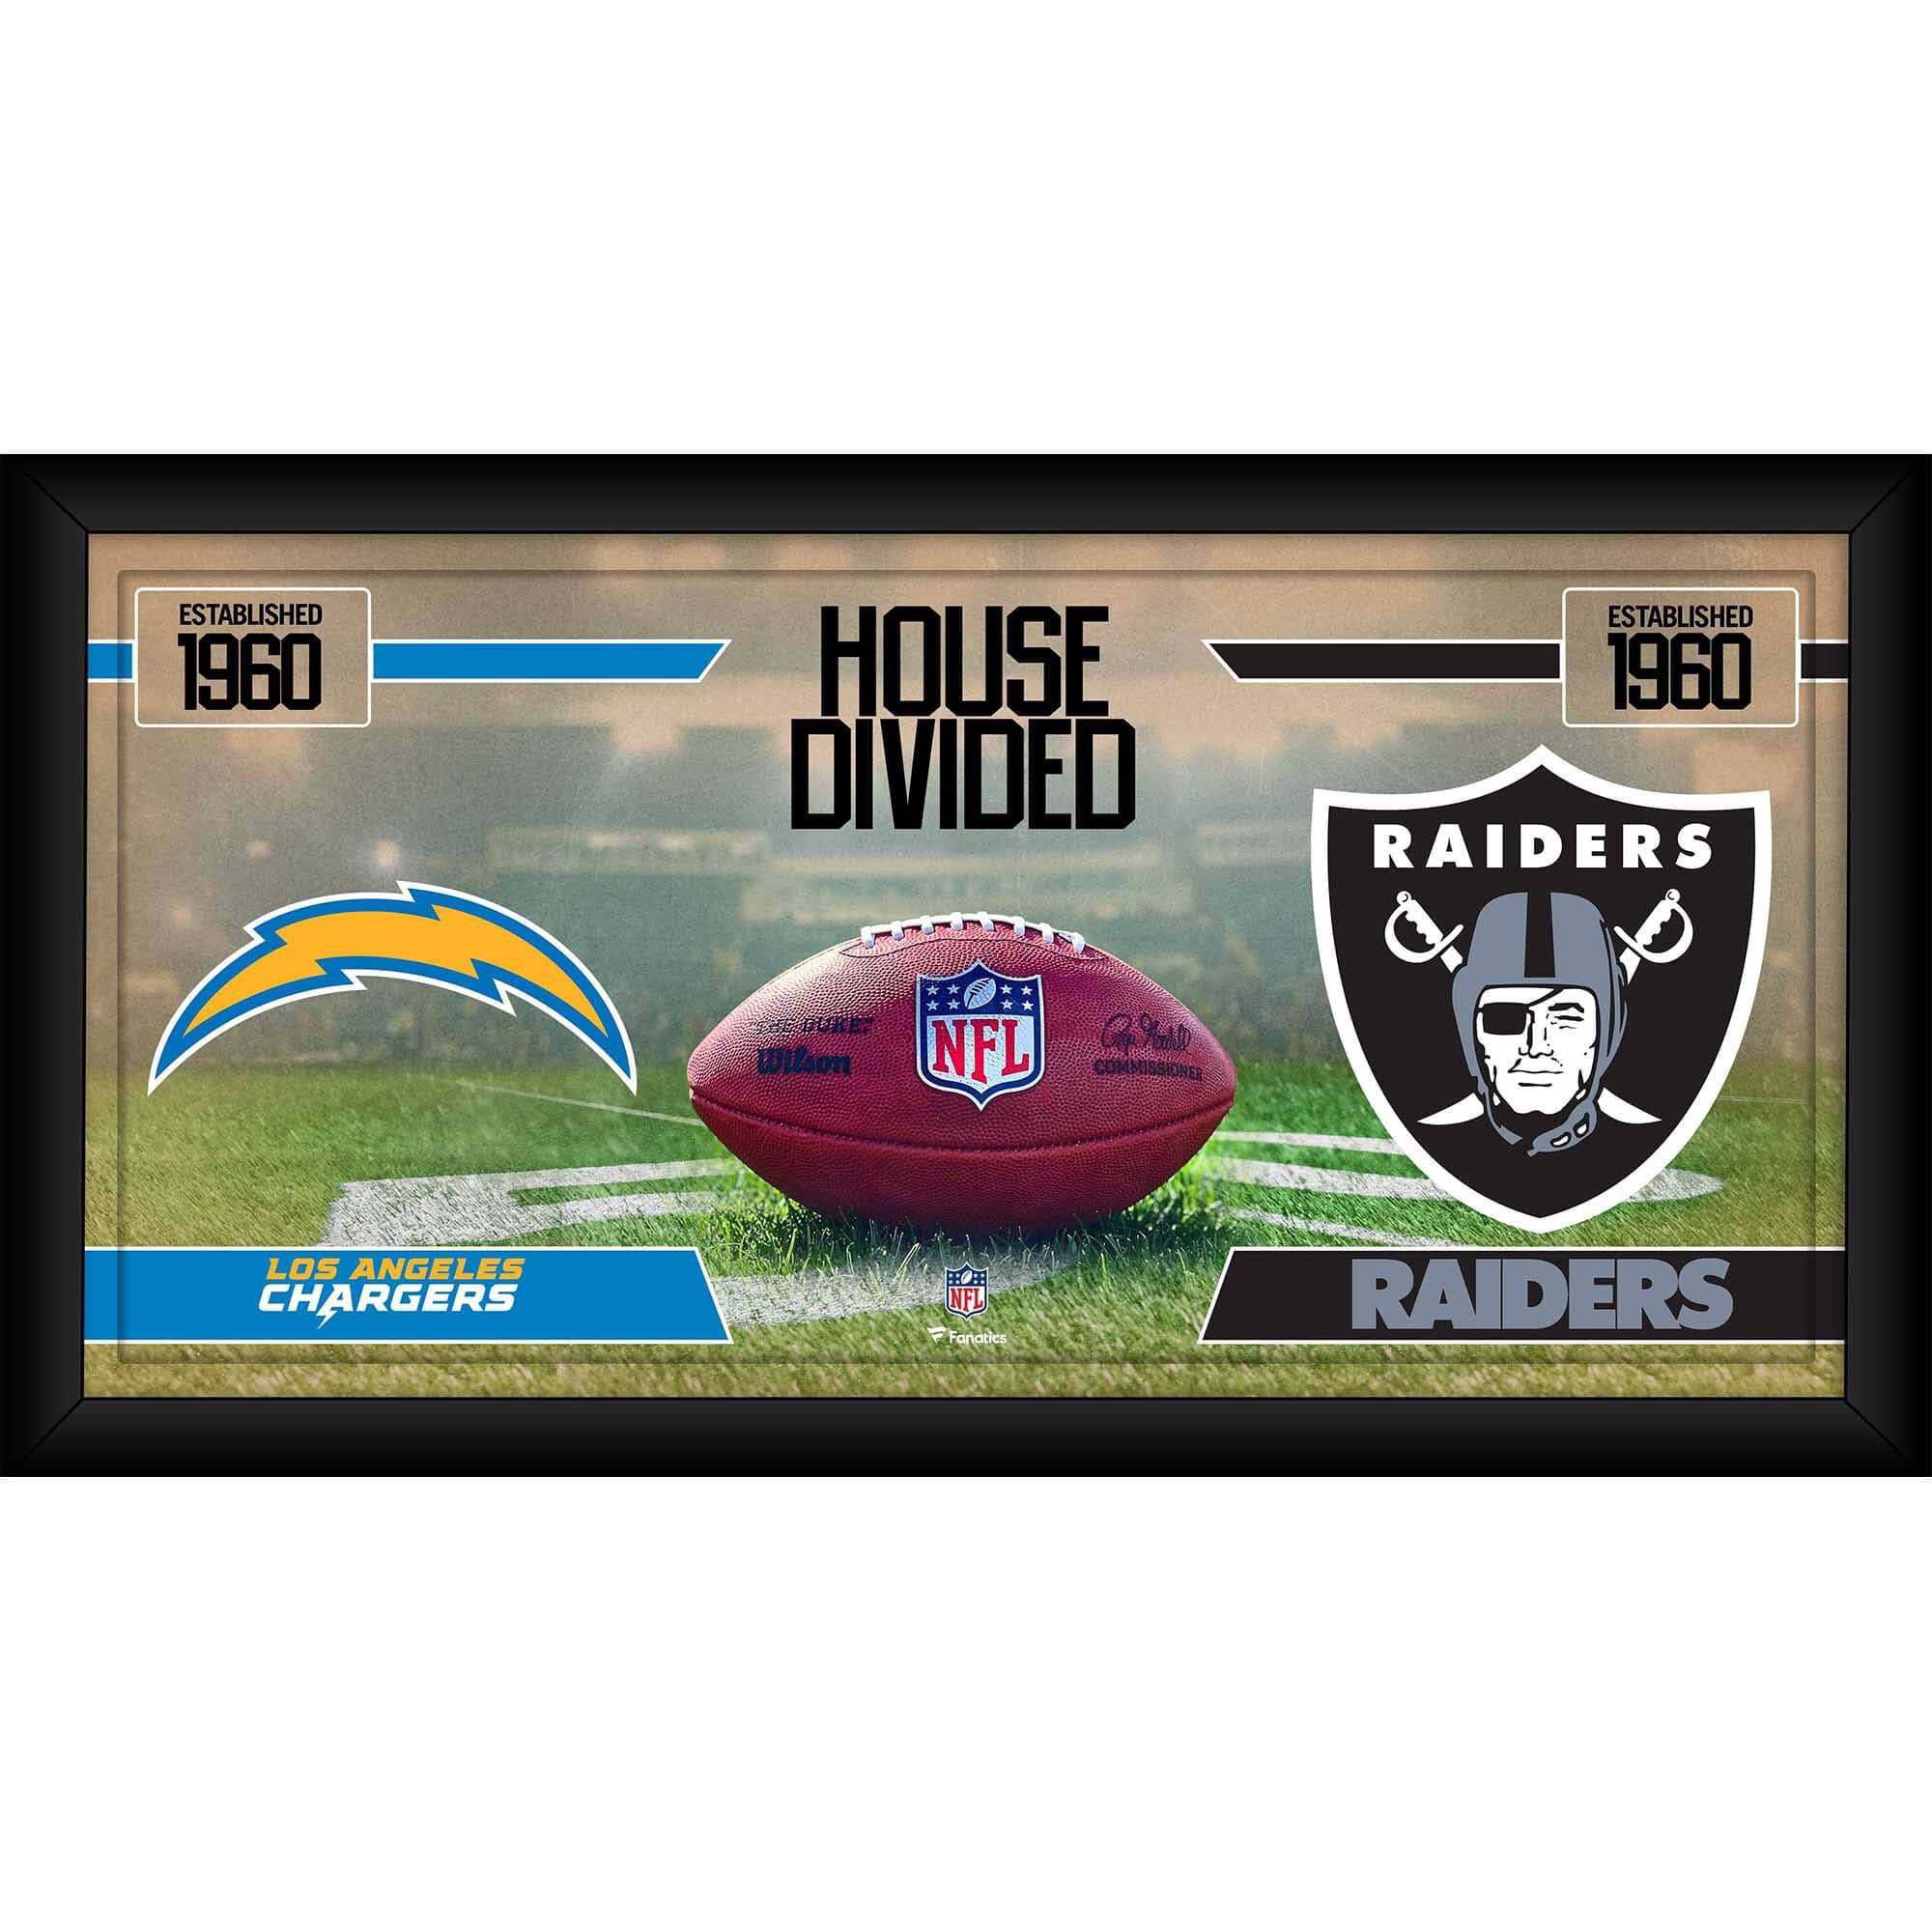 Los Angeles Chargers vs. Las Vegas Raiders Framed 10' x 20' House Divided  Football Collage 